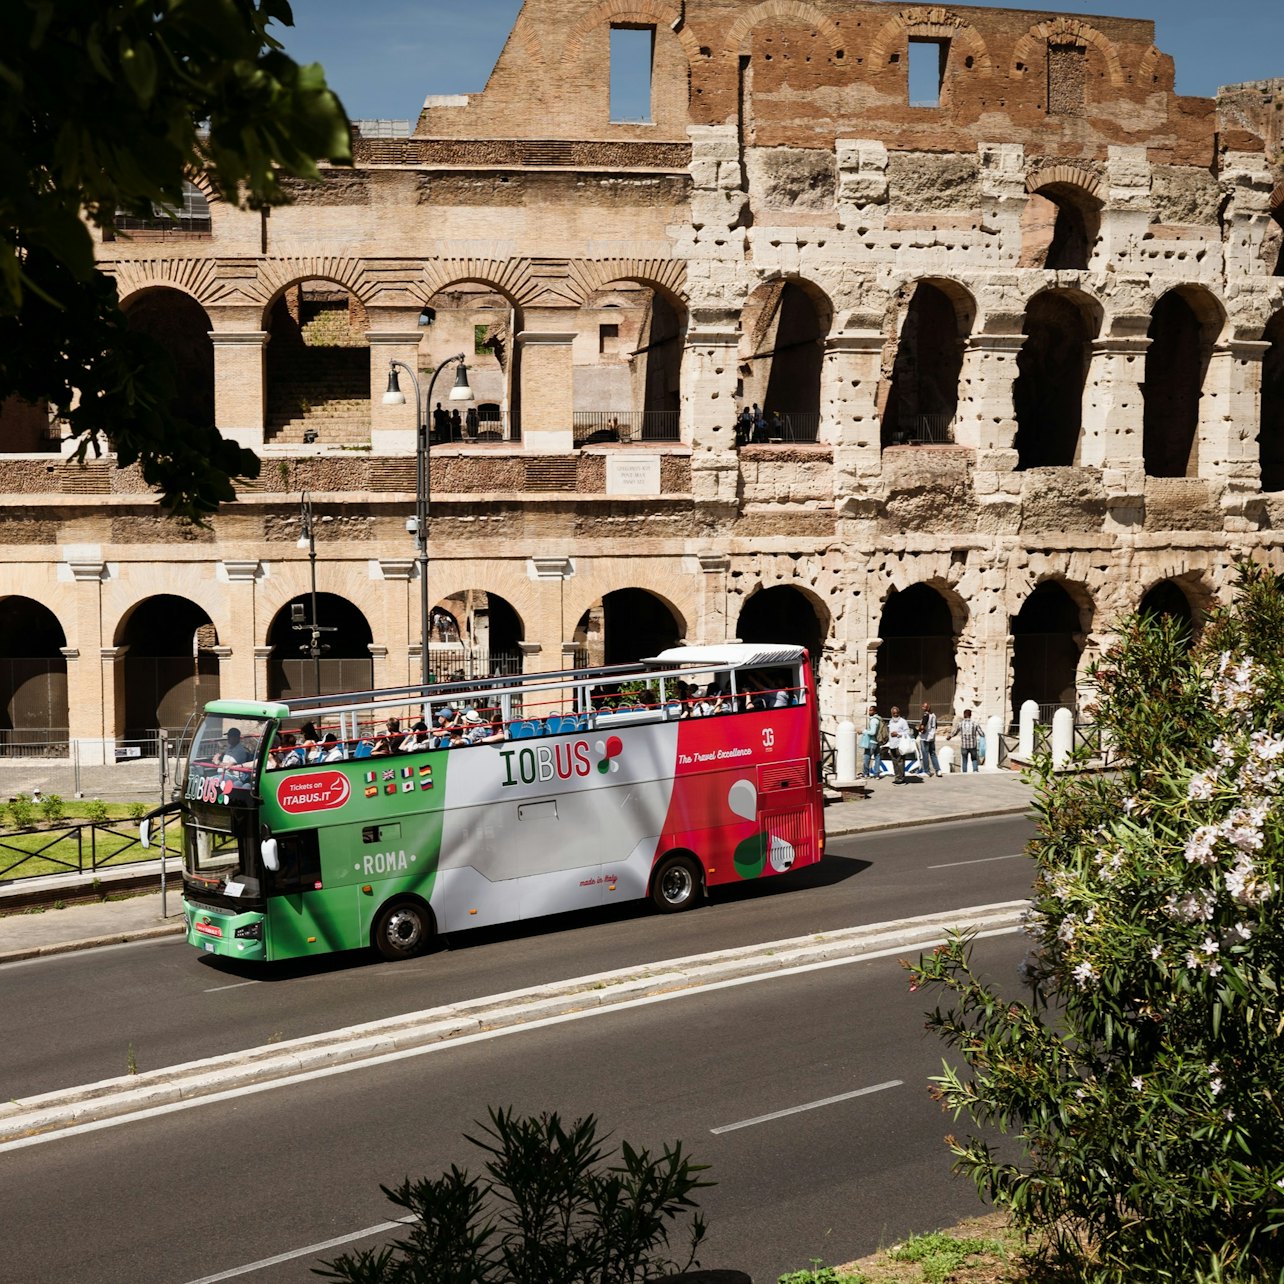 IOBUS Rome: Hop-on Hop-off Panoramic Open Bus Tour - Accommodations in Rome